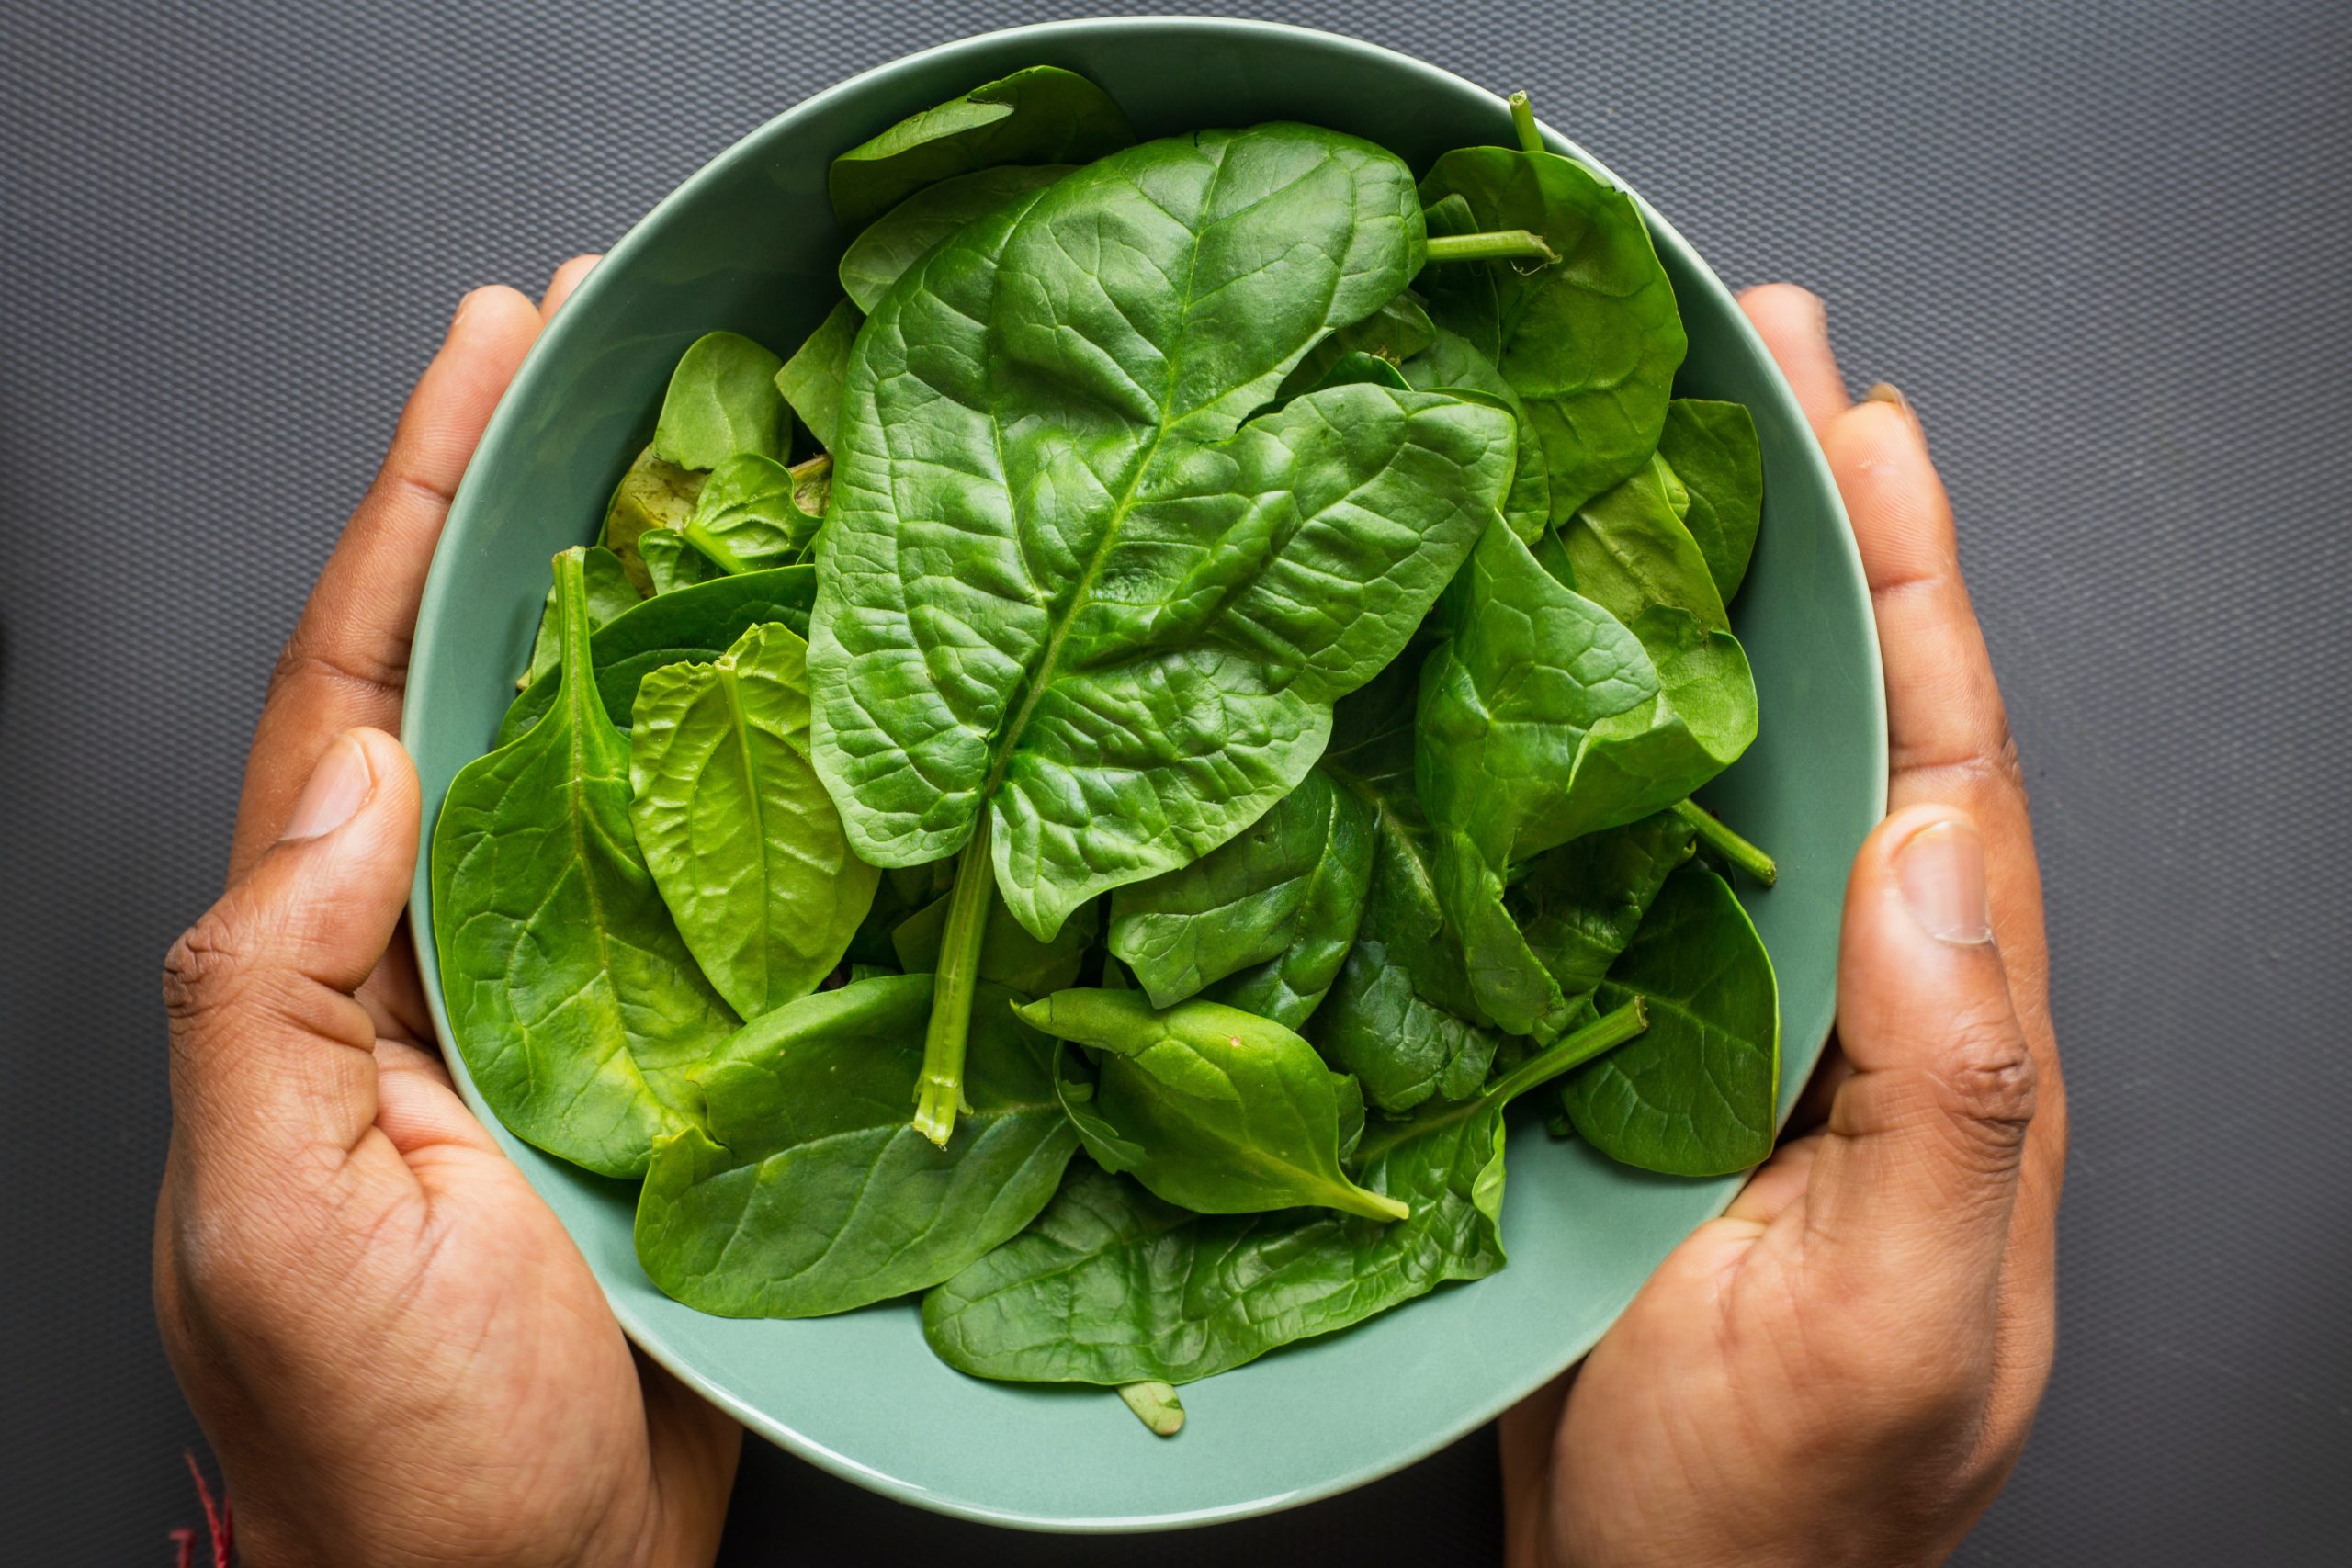 How to Tell If Spinach is Bad